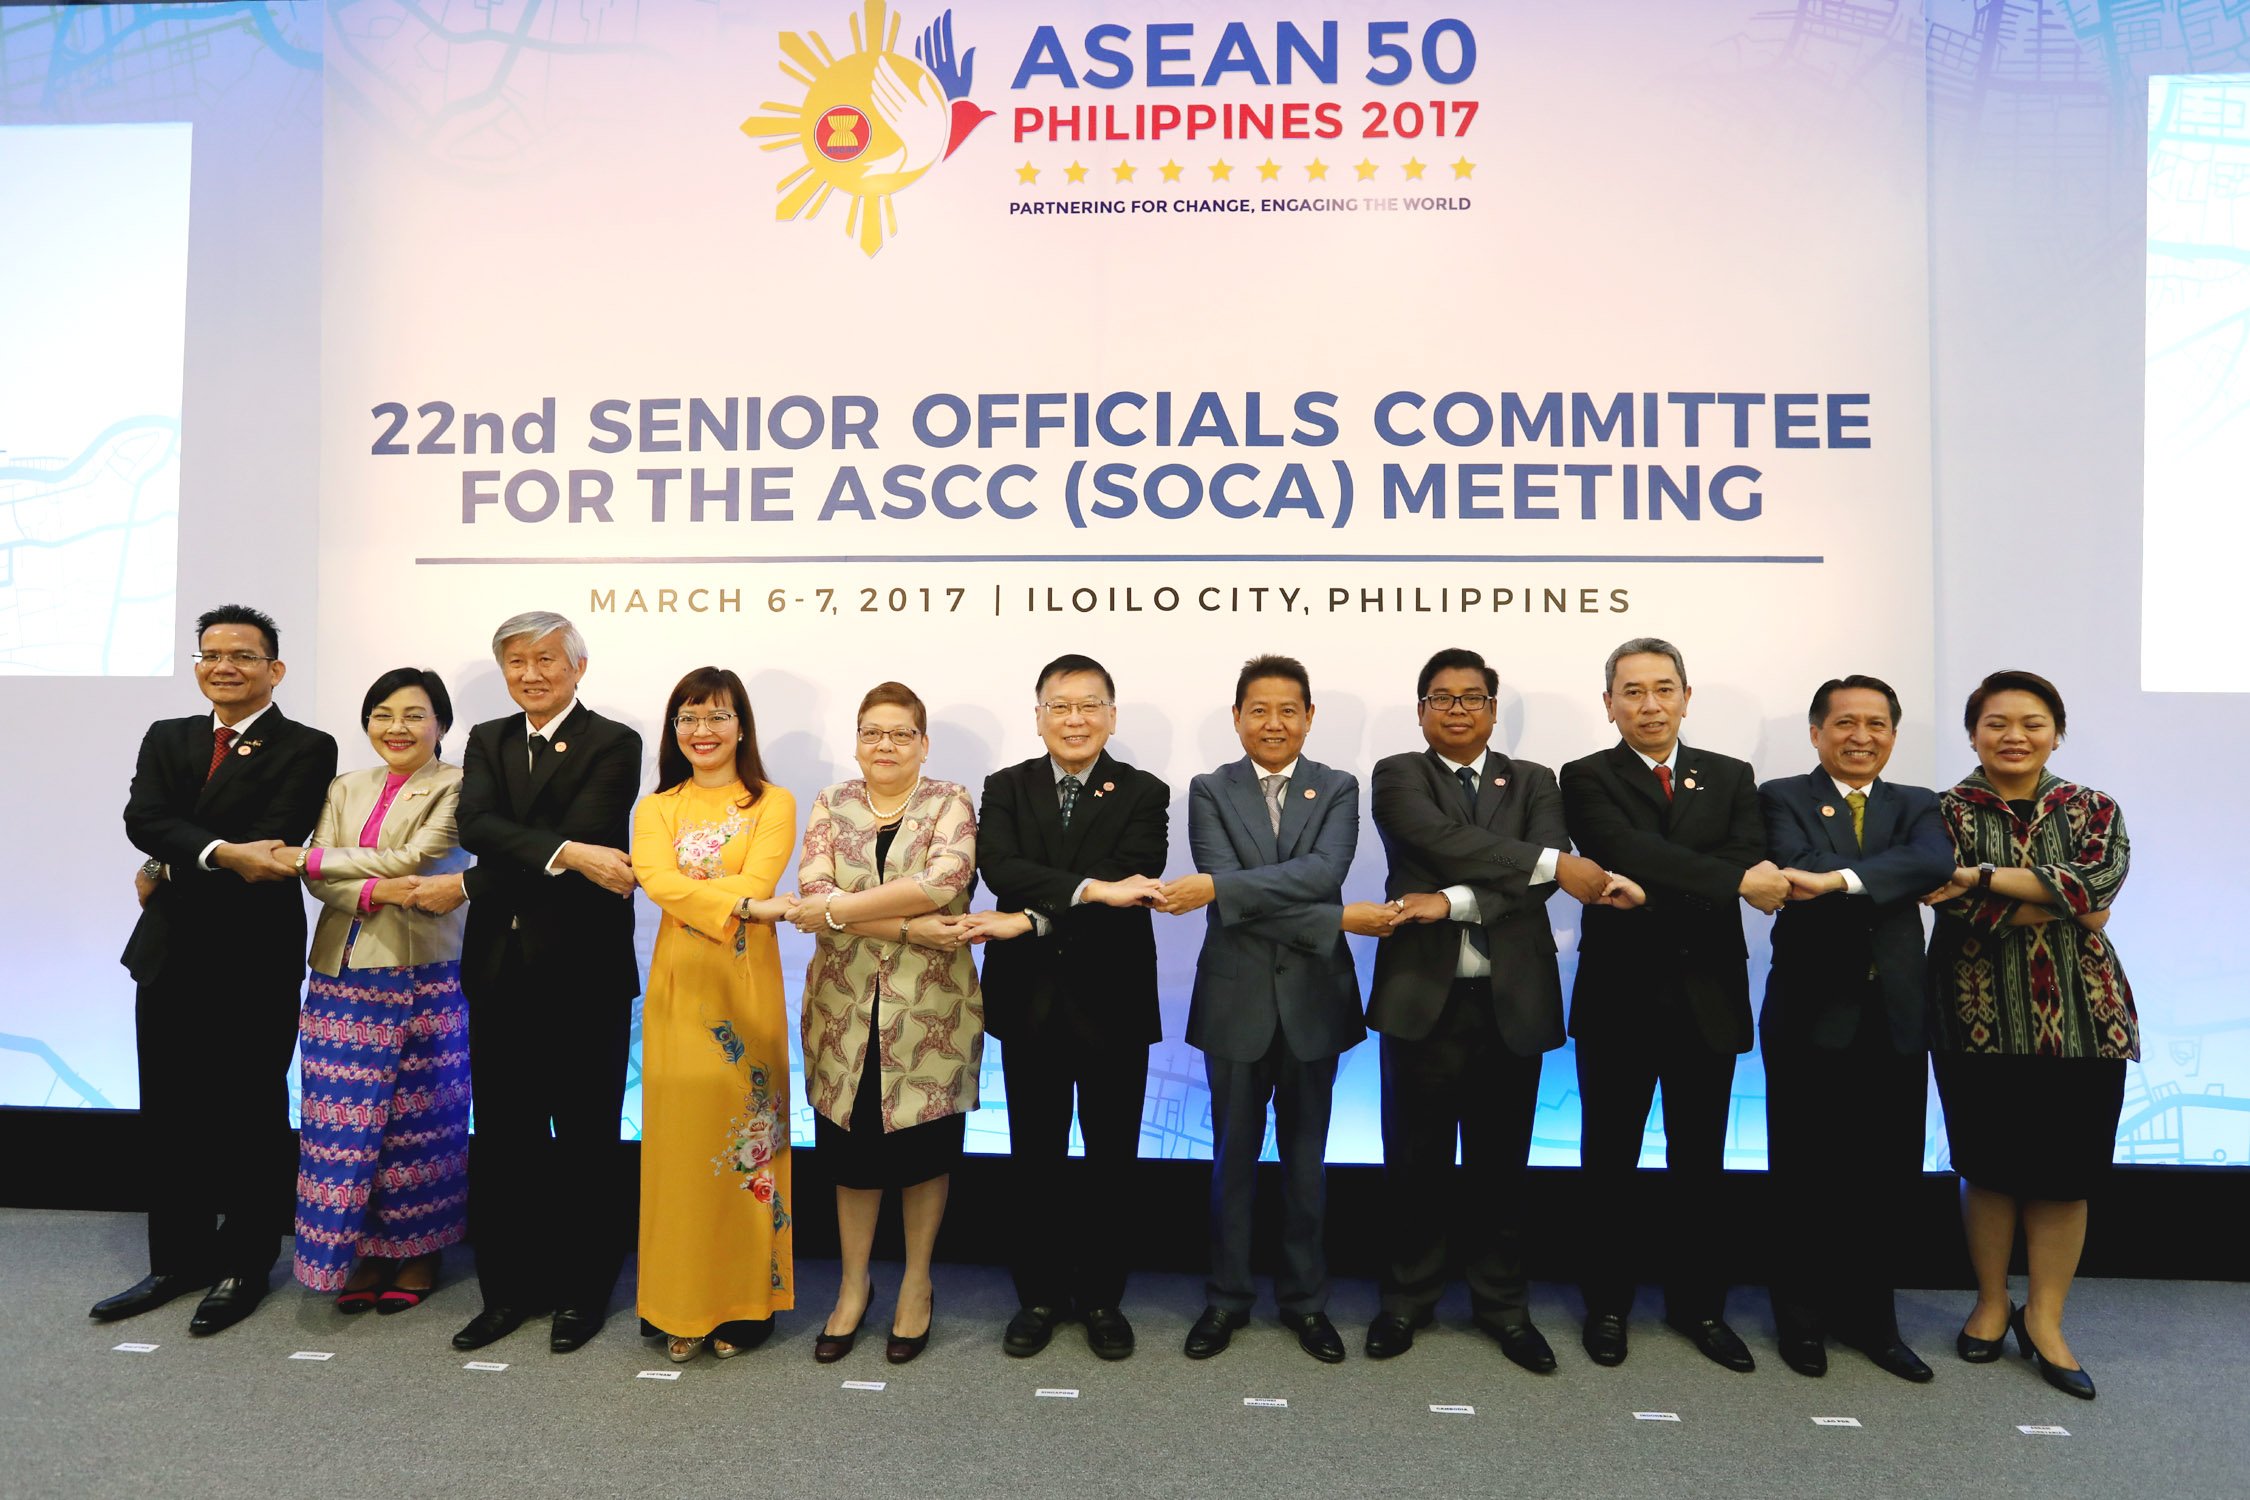 22nd Senior Officials Committee for ASCC Meeting